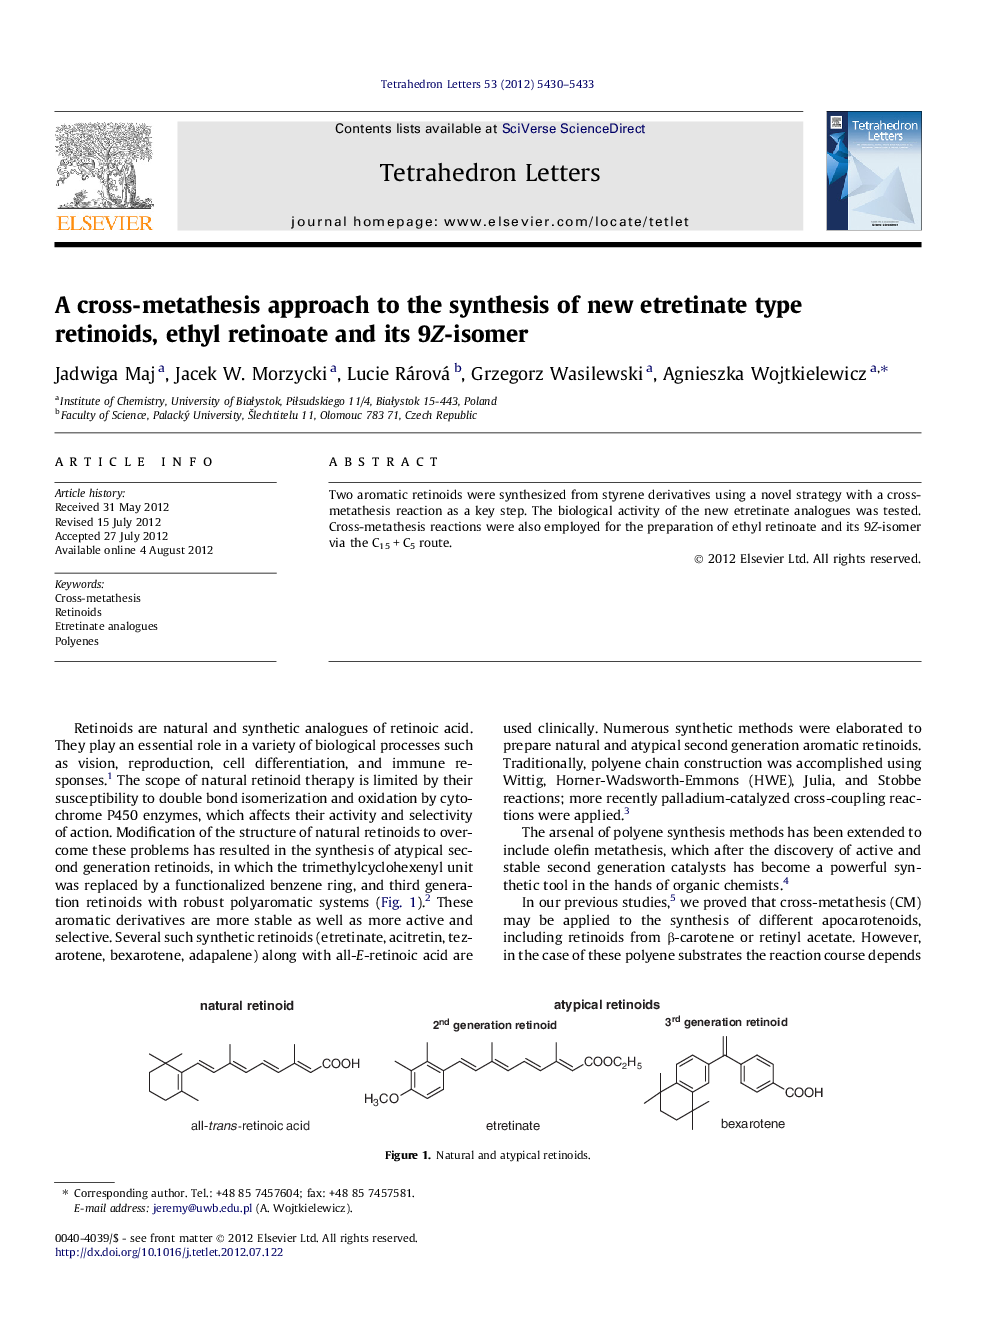 A cross-metathesis approach to the synthesis of new etretinate type retinoids, ethyl retinoate and its 9Z-isomer